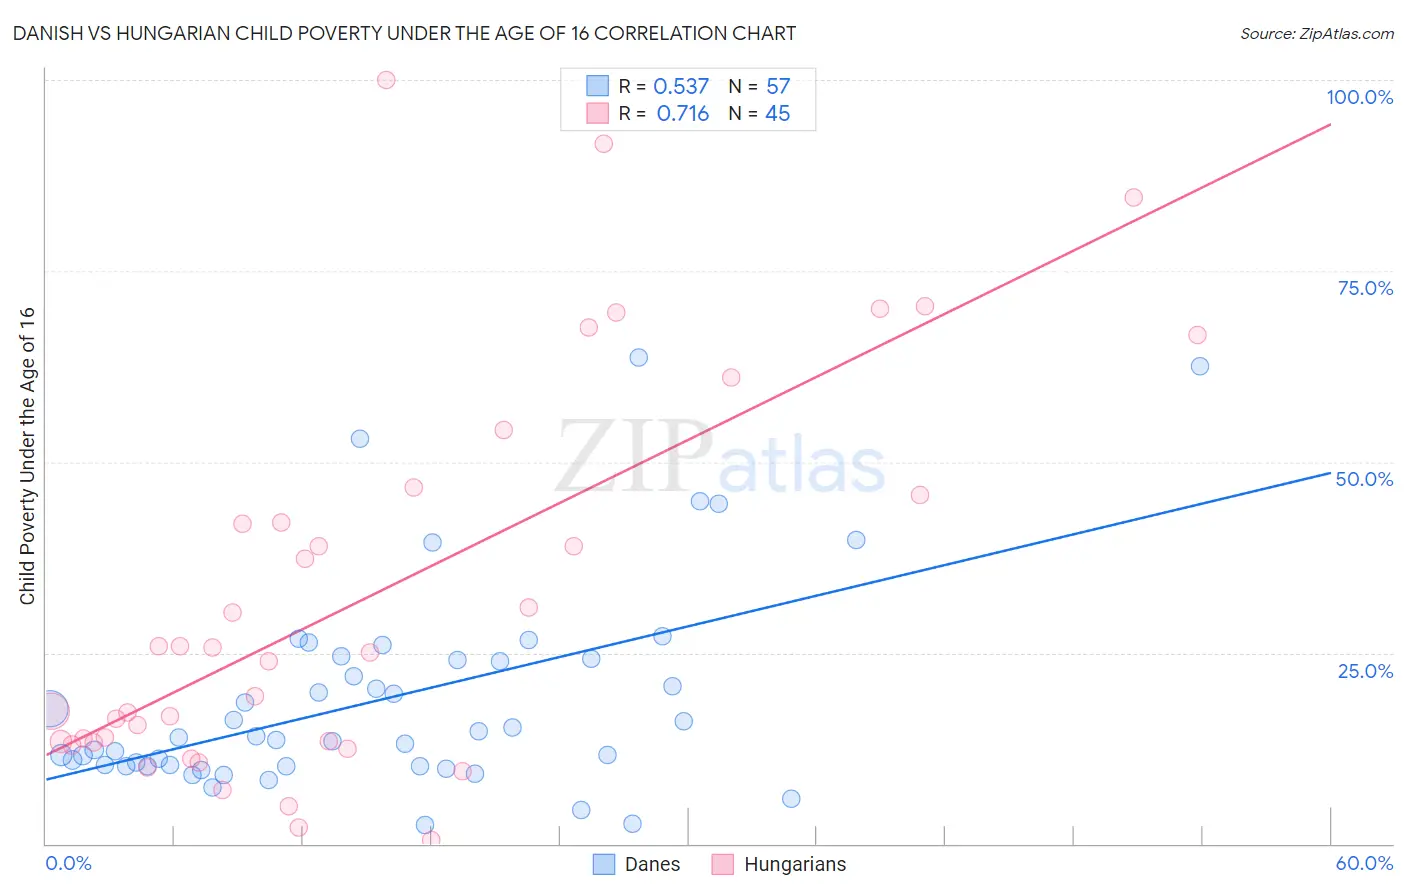 Danish vs Hungarian Child Poverty Under the Age of 16